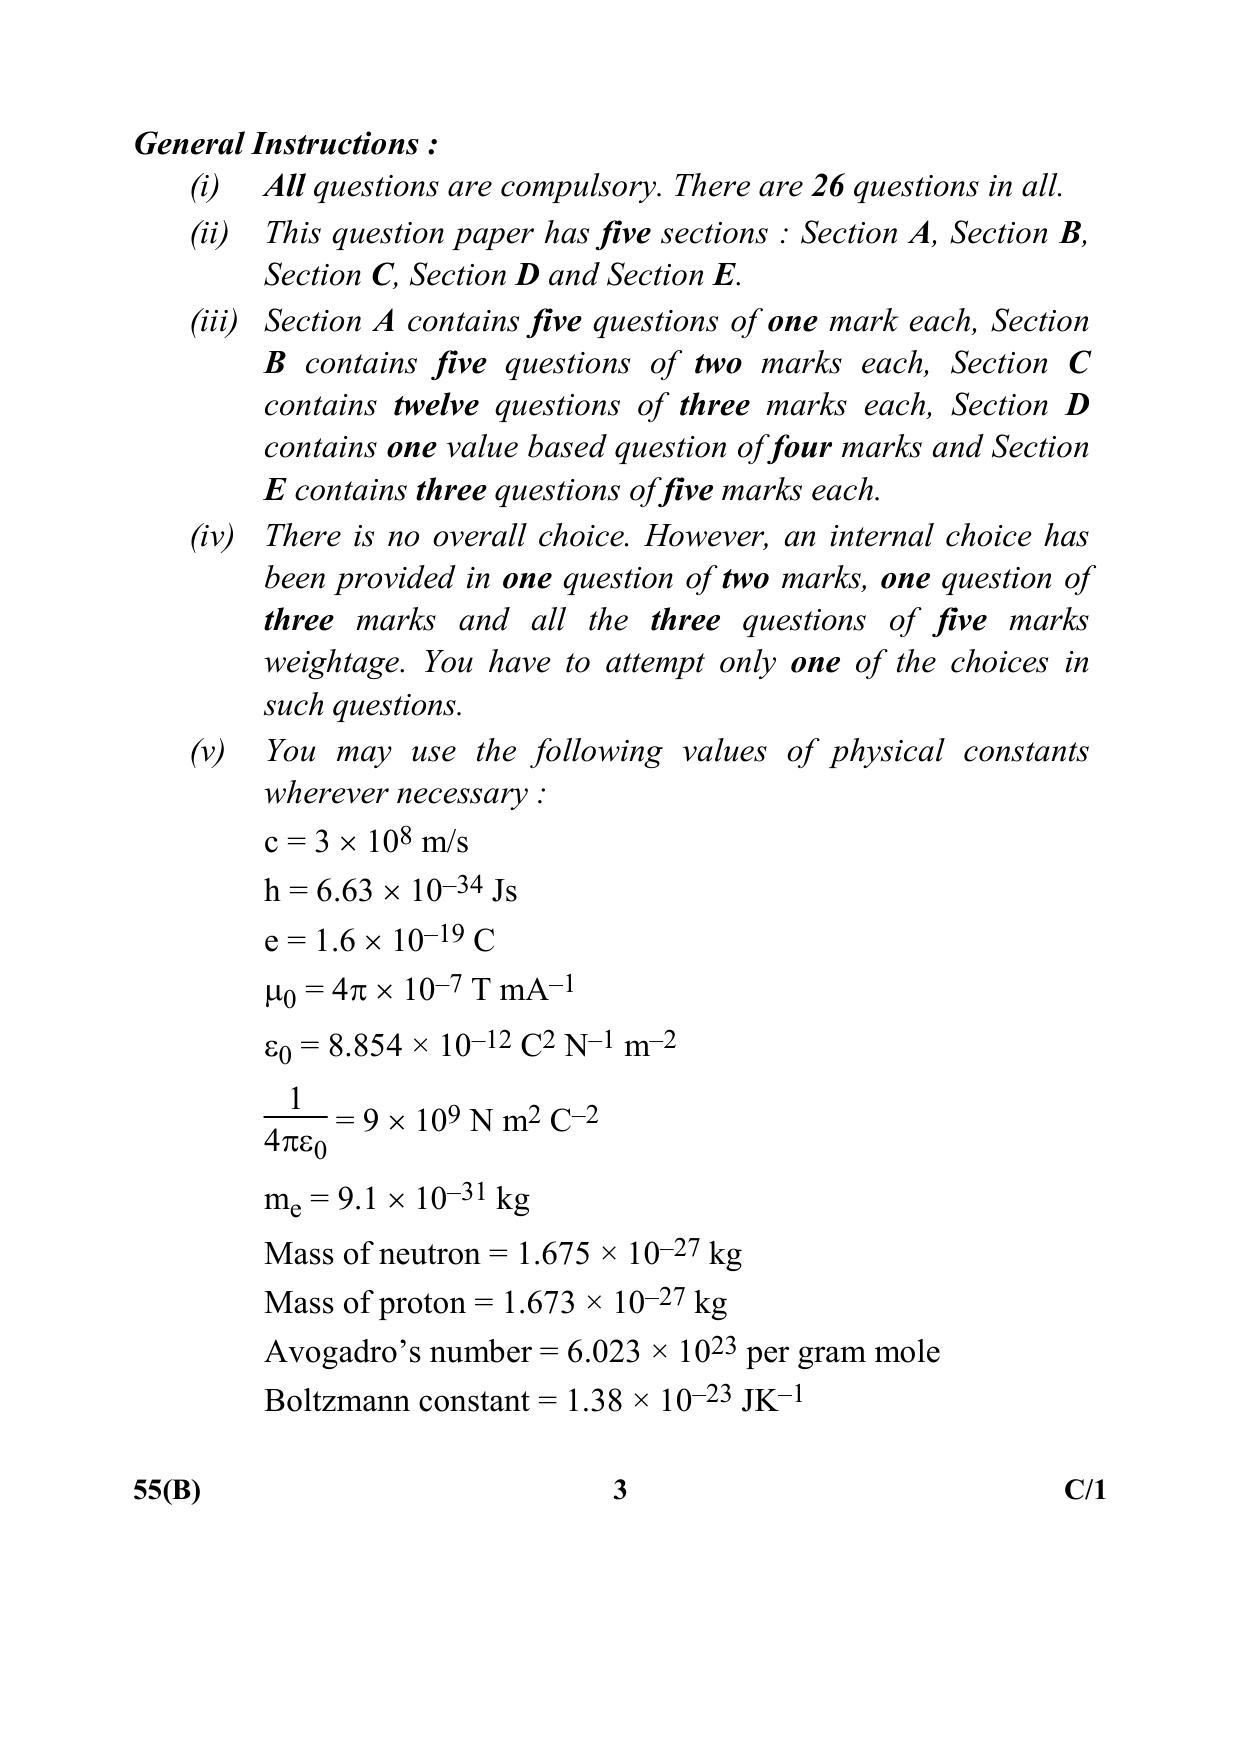 CBSE Class 12 55(B) (Physics) 2018 Compartment Question Paper - Page 3